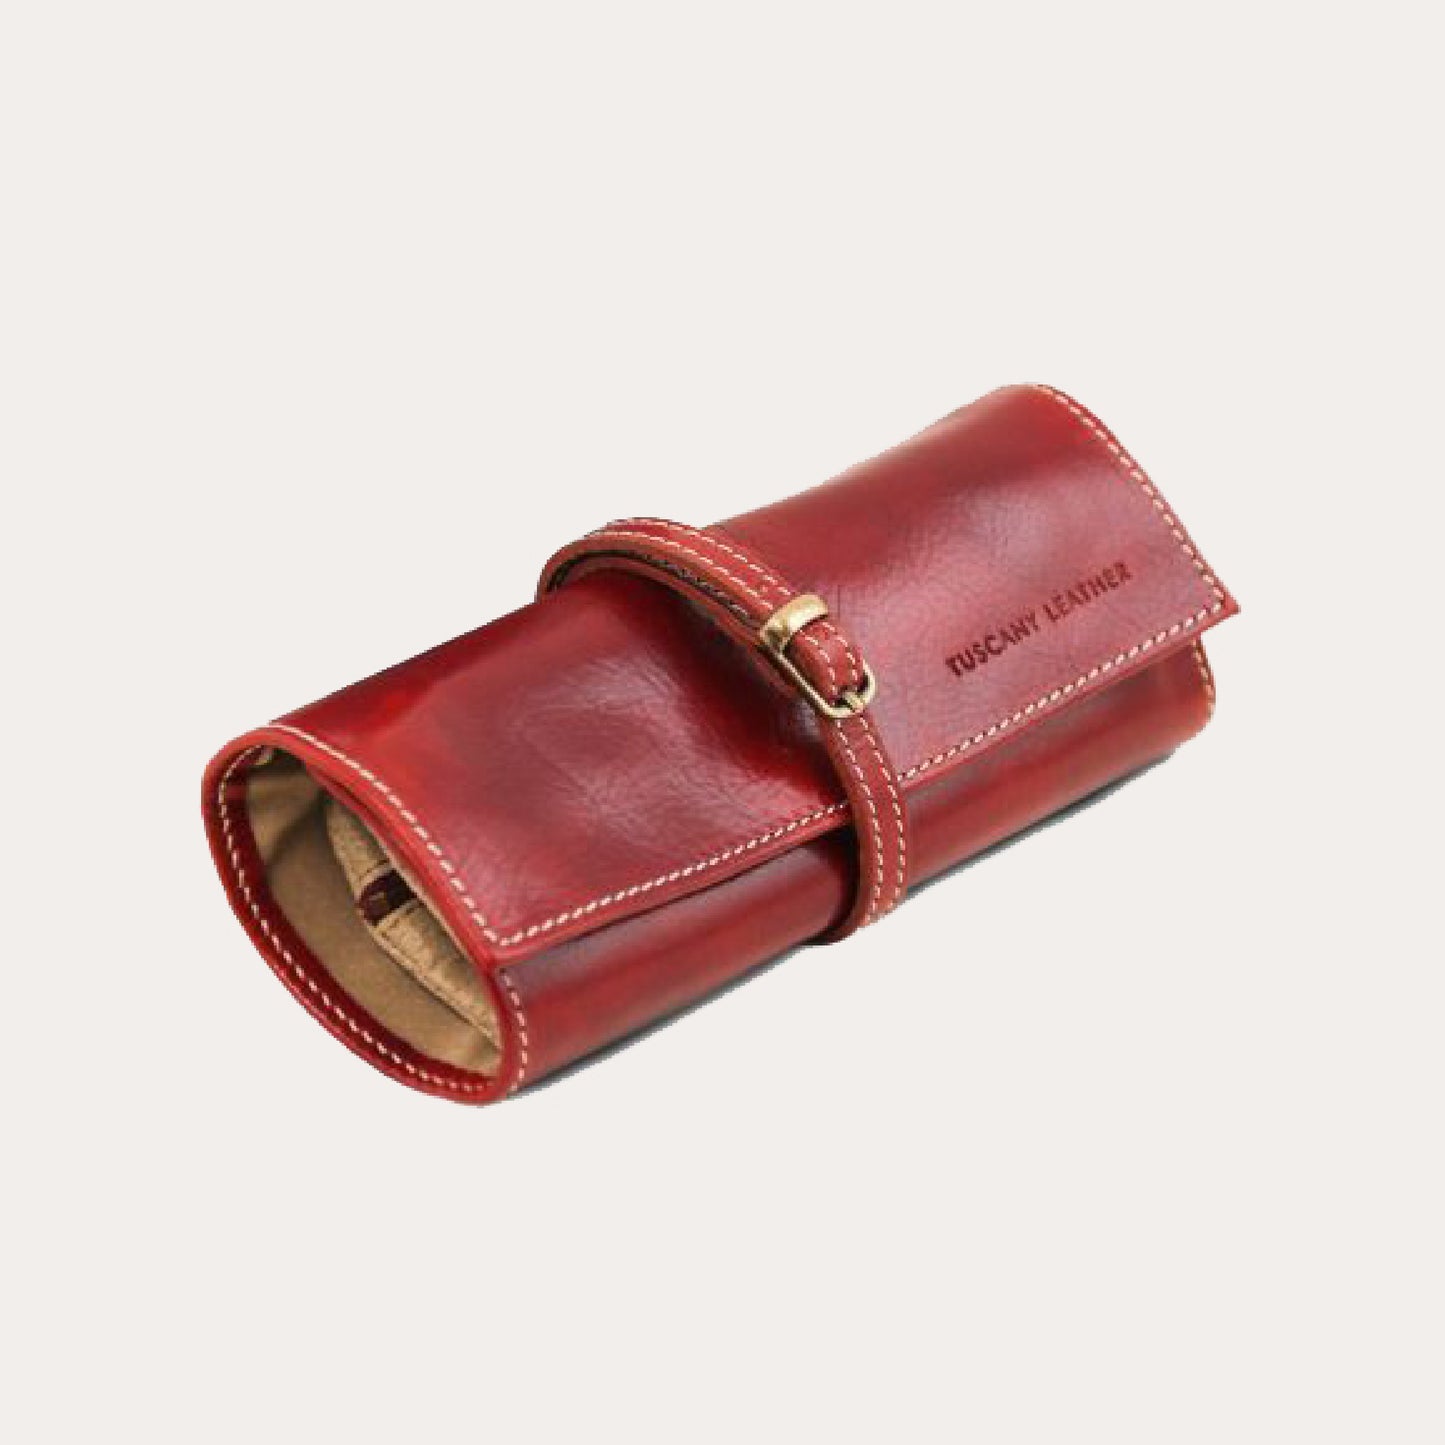 Tuscany Leather Red Leather Jewellery Roll